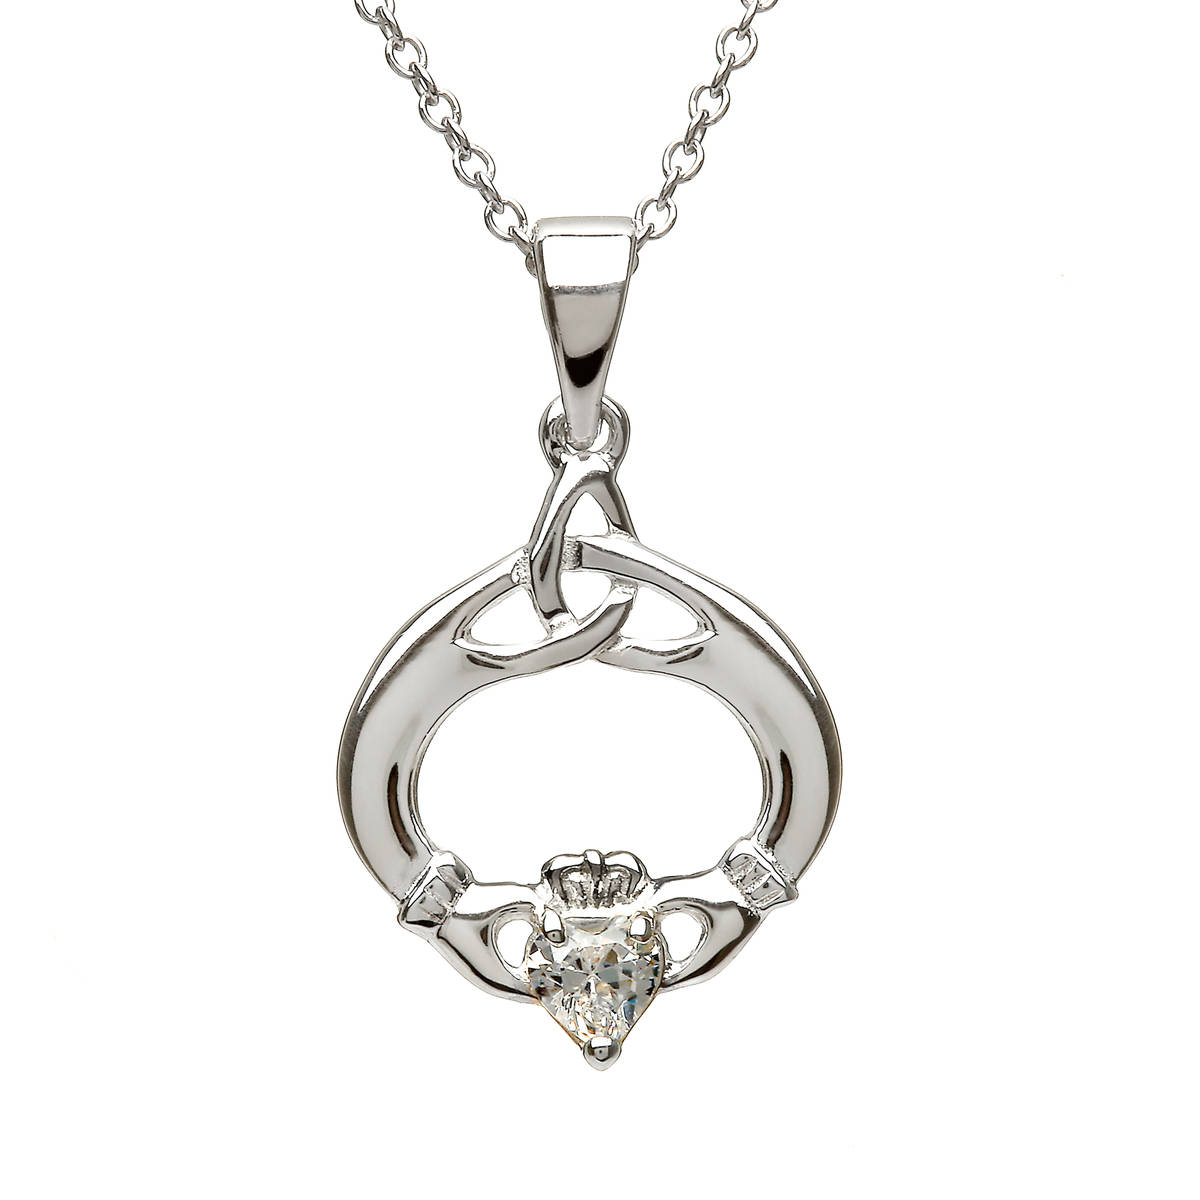 Silver Pendant with Cubic Zirconia April Birthstone. Round Trinity Knot and Claddagh Design. 